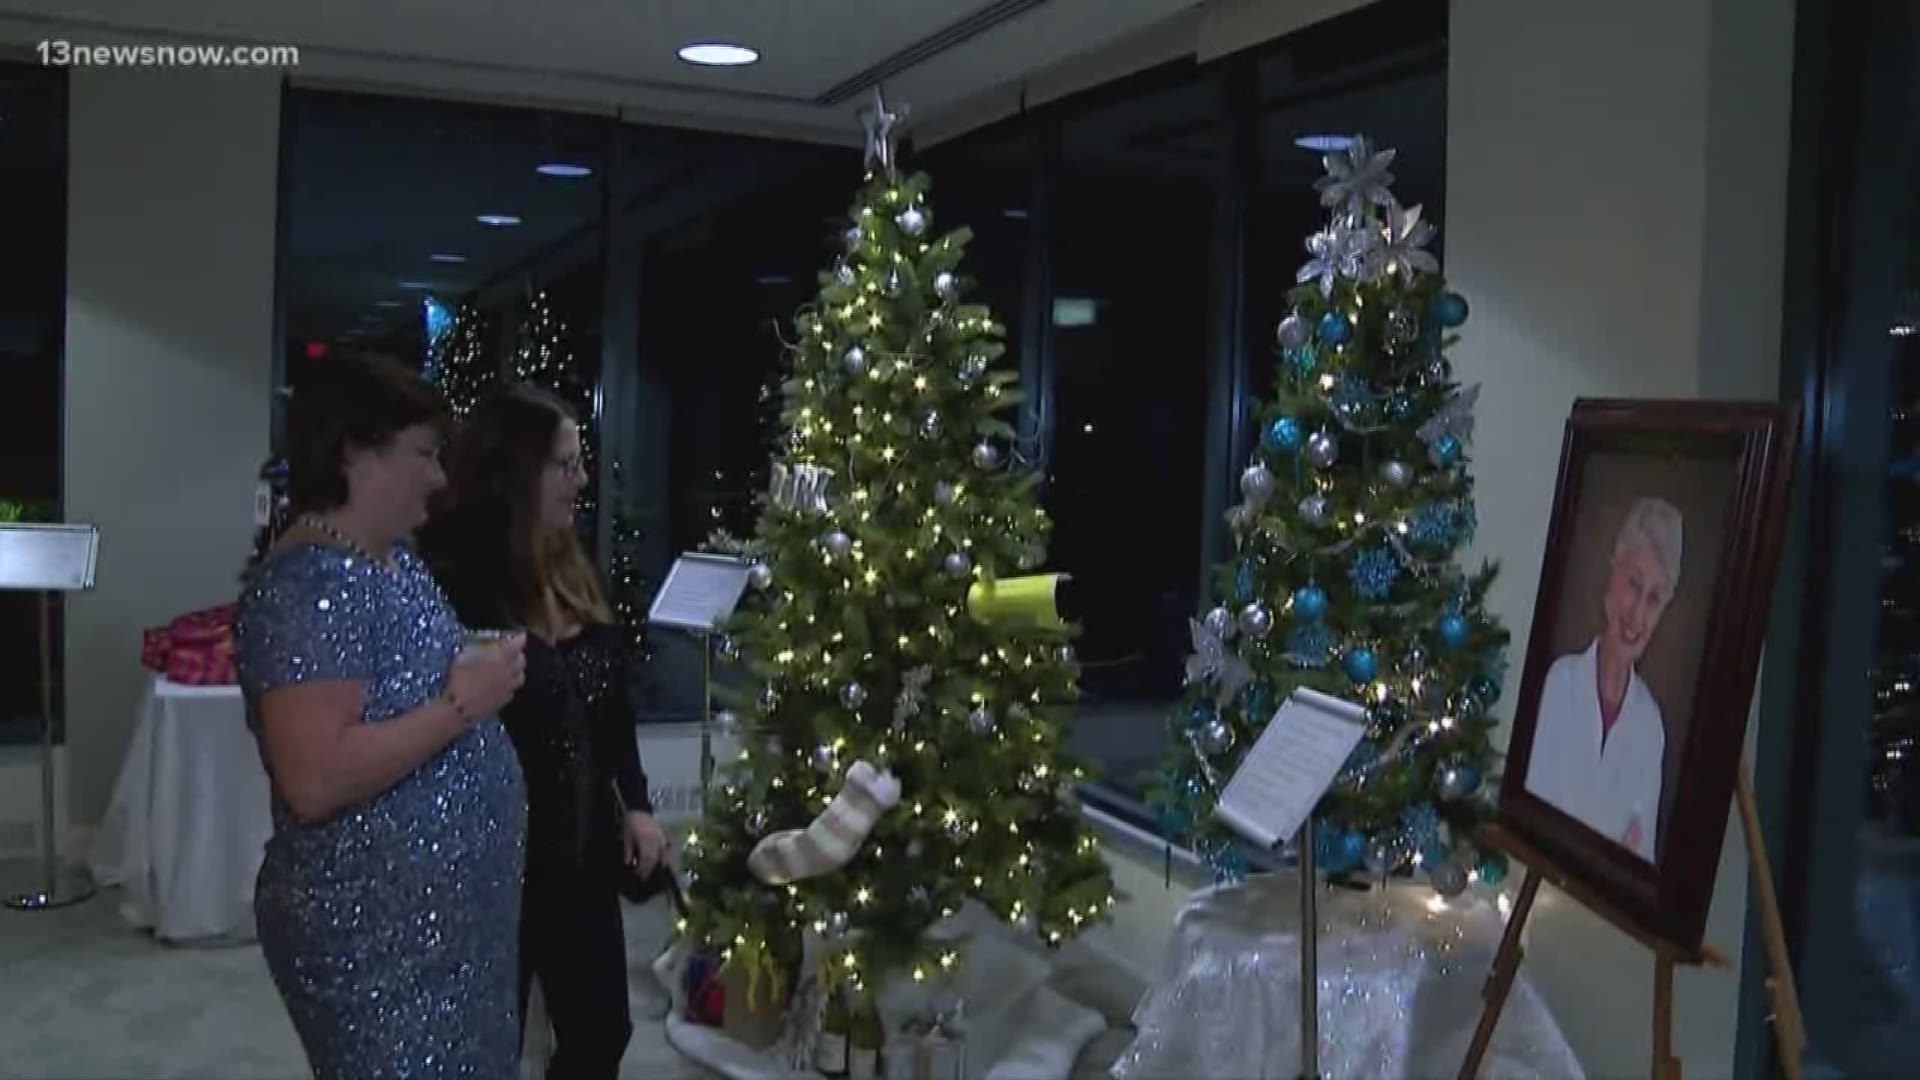 The inaugural 'Festival of Trees - The Magic of Giving' featured 30 beautifully decorated trees sponsored by companies and donors in the community.